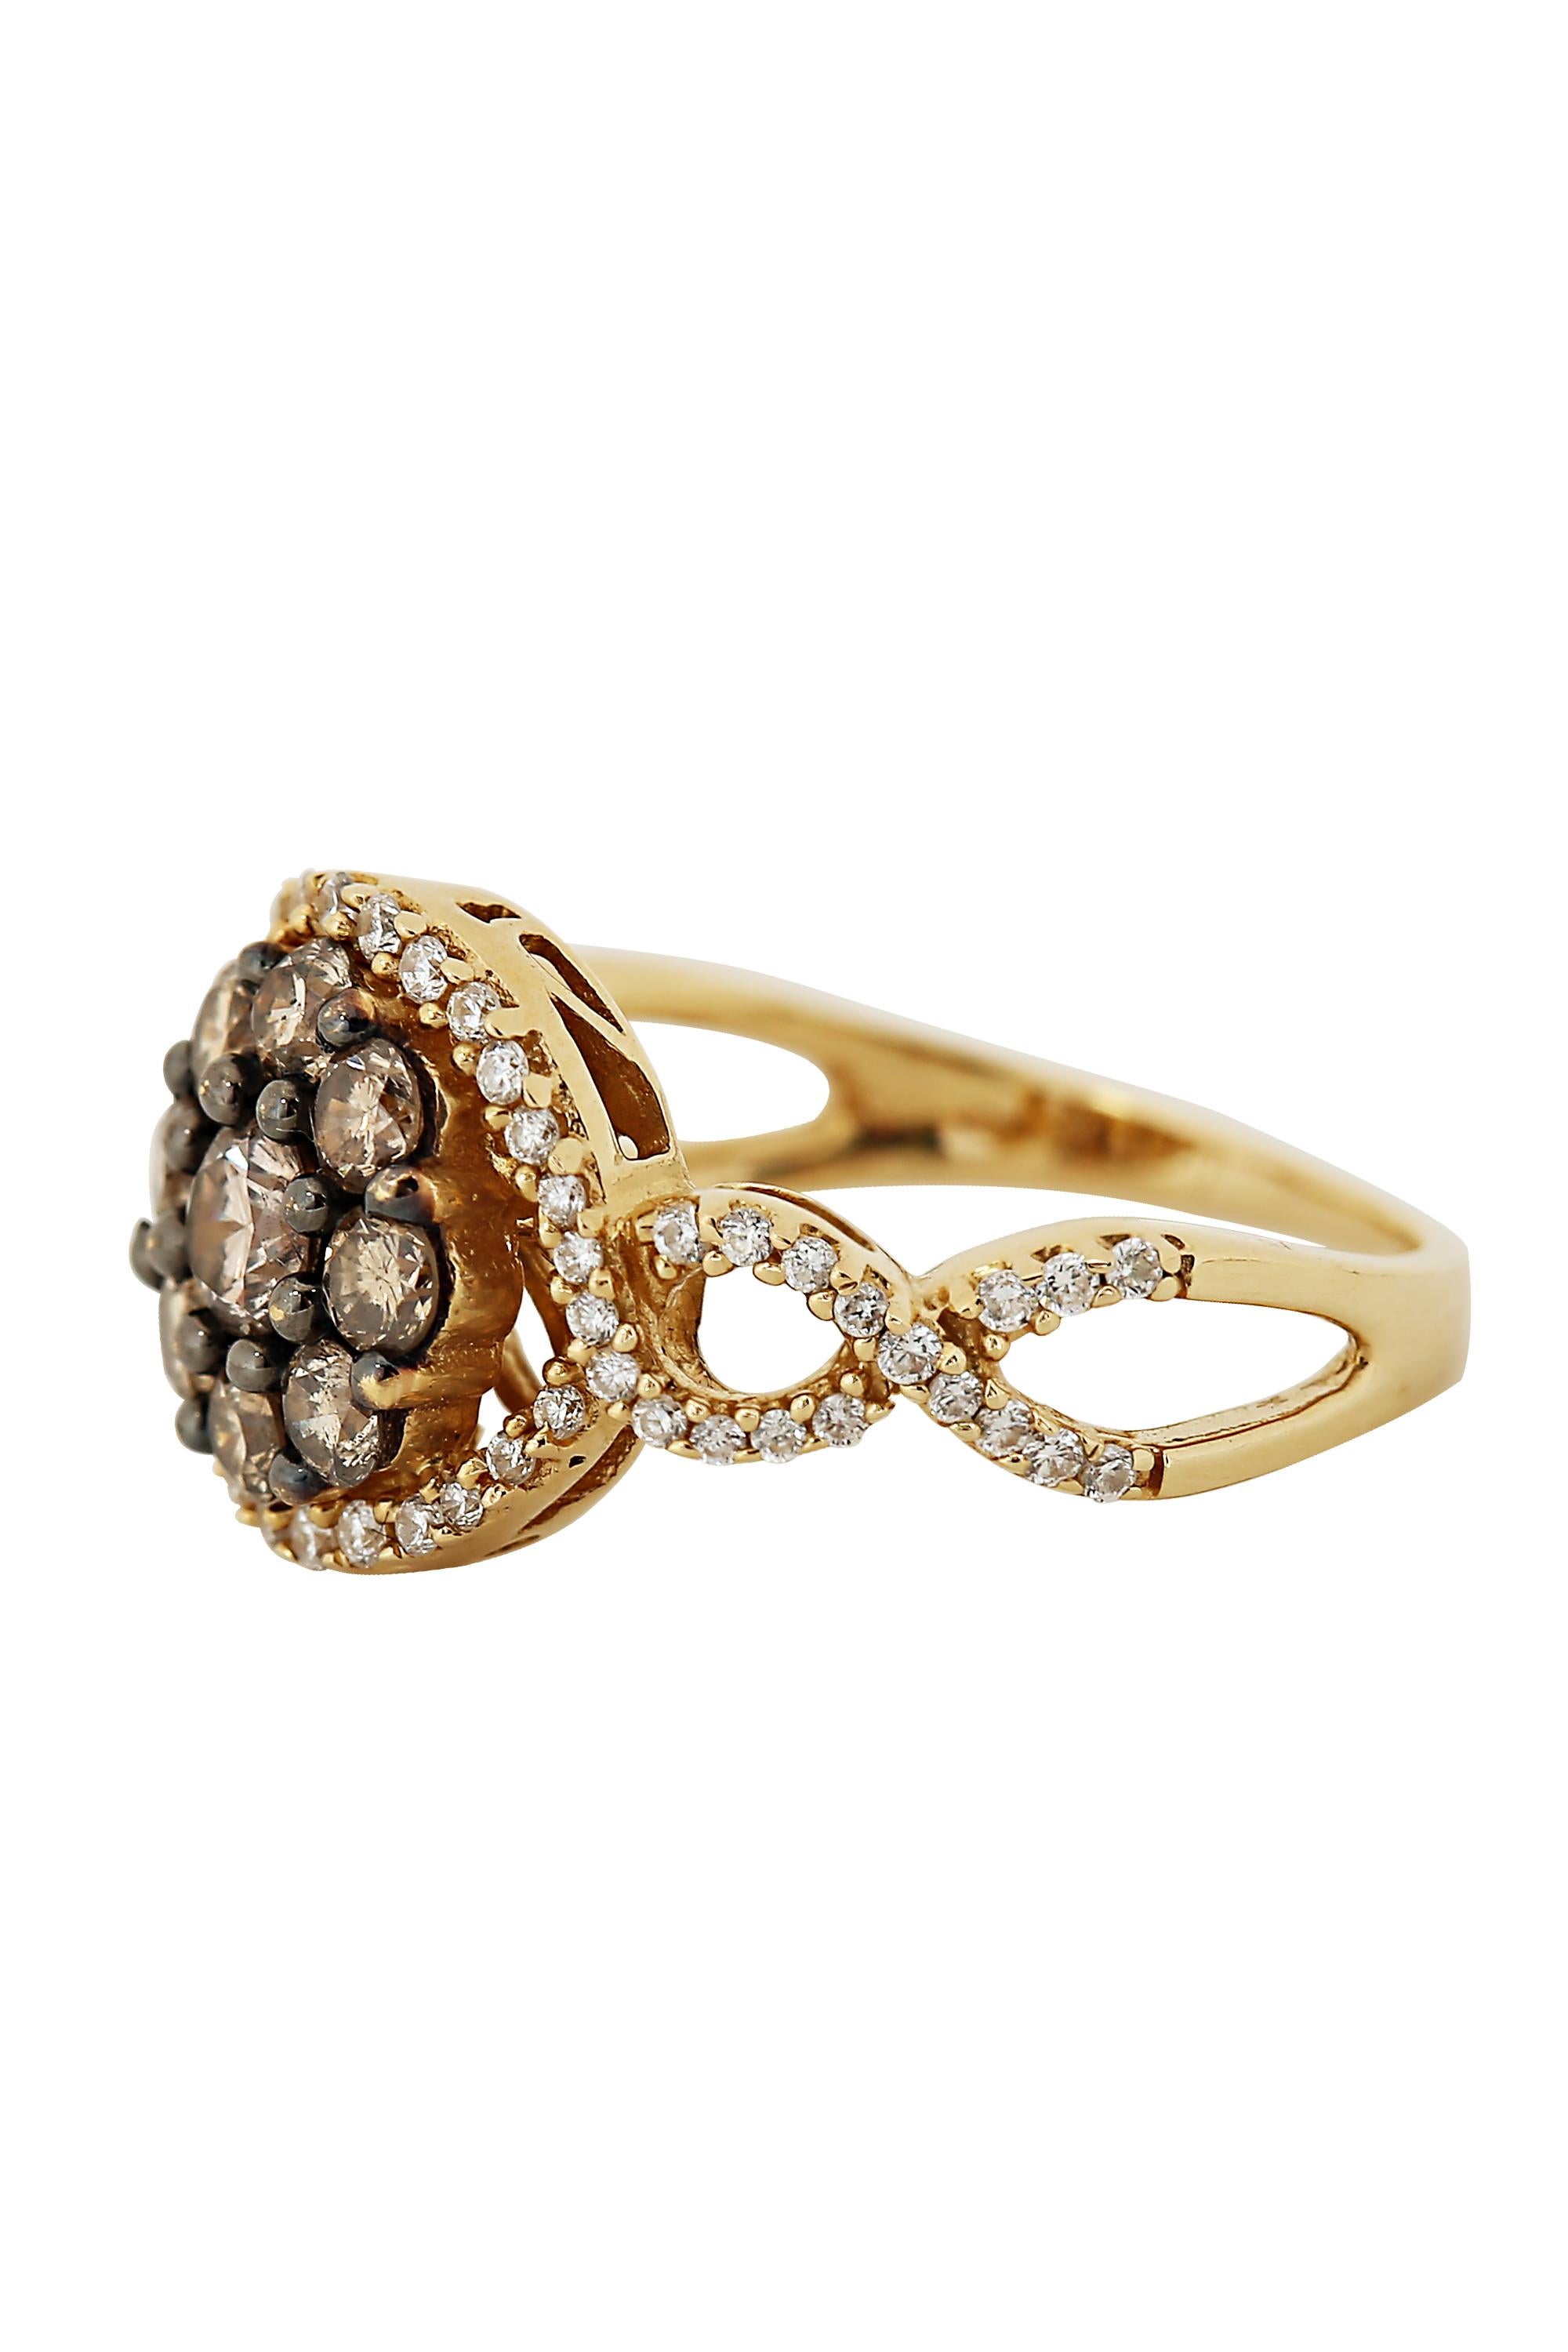 This romantic ring features a center cluster of natural cognac colored diamonds of approximately .70 carats enhanced by blackened gold prongs and a framing of white pave diamonds terminating in graceful openwork shoulders. The ring is fabricated in